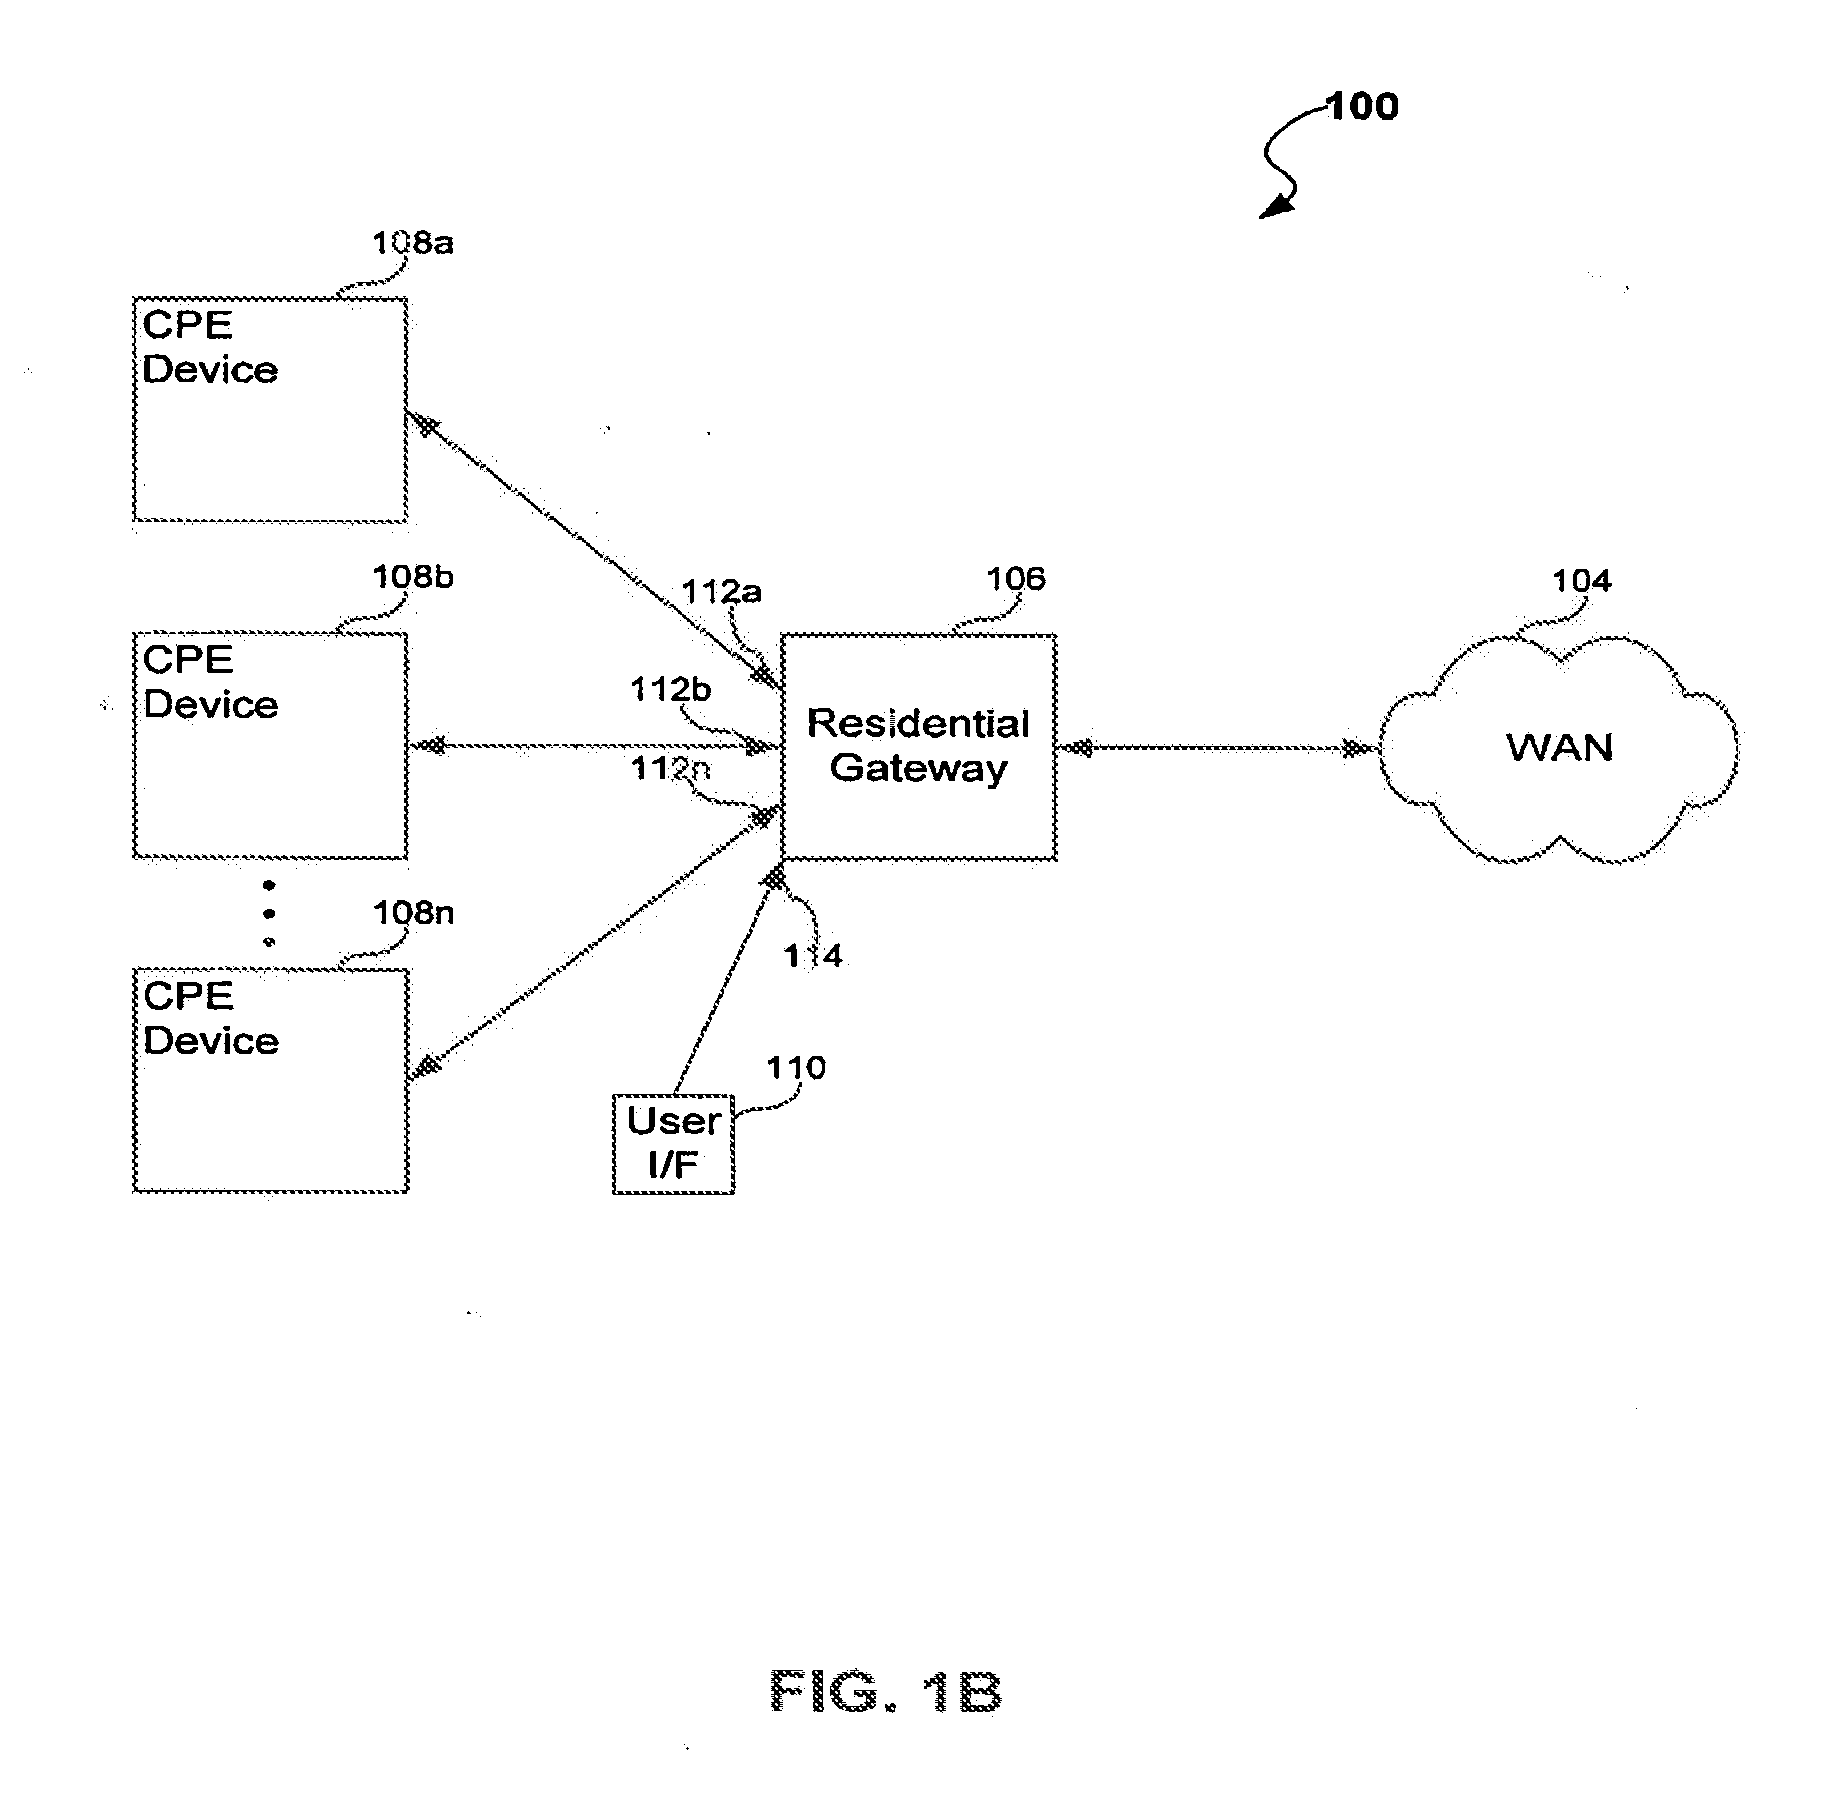 System, Method and Computer Program Product for Residential Gateway Monitoring and Control